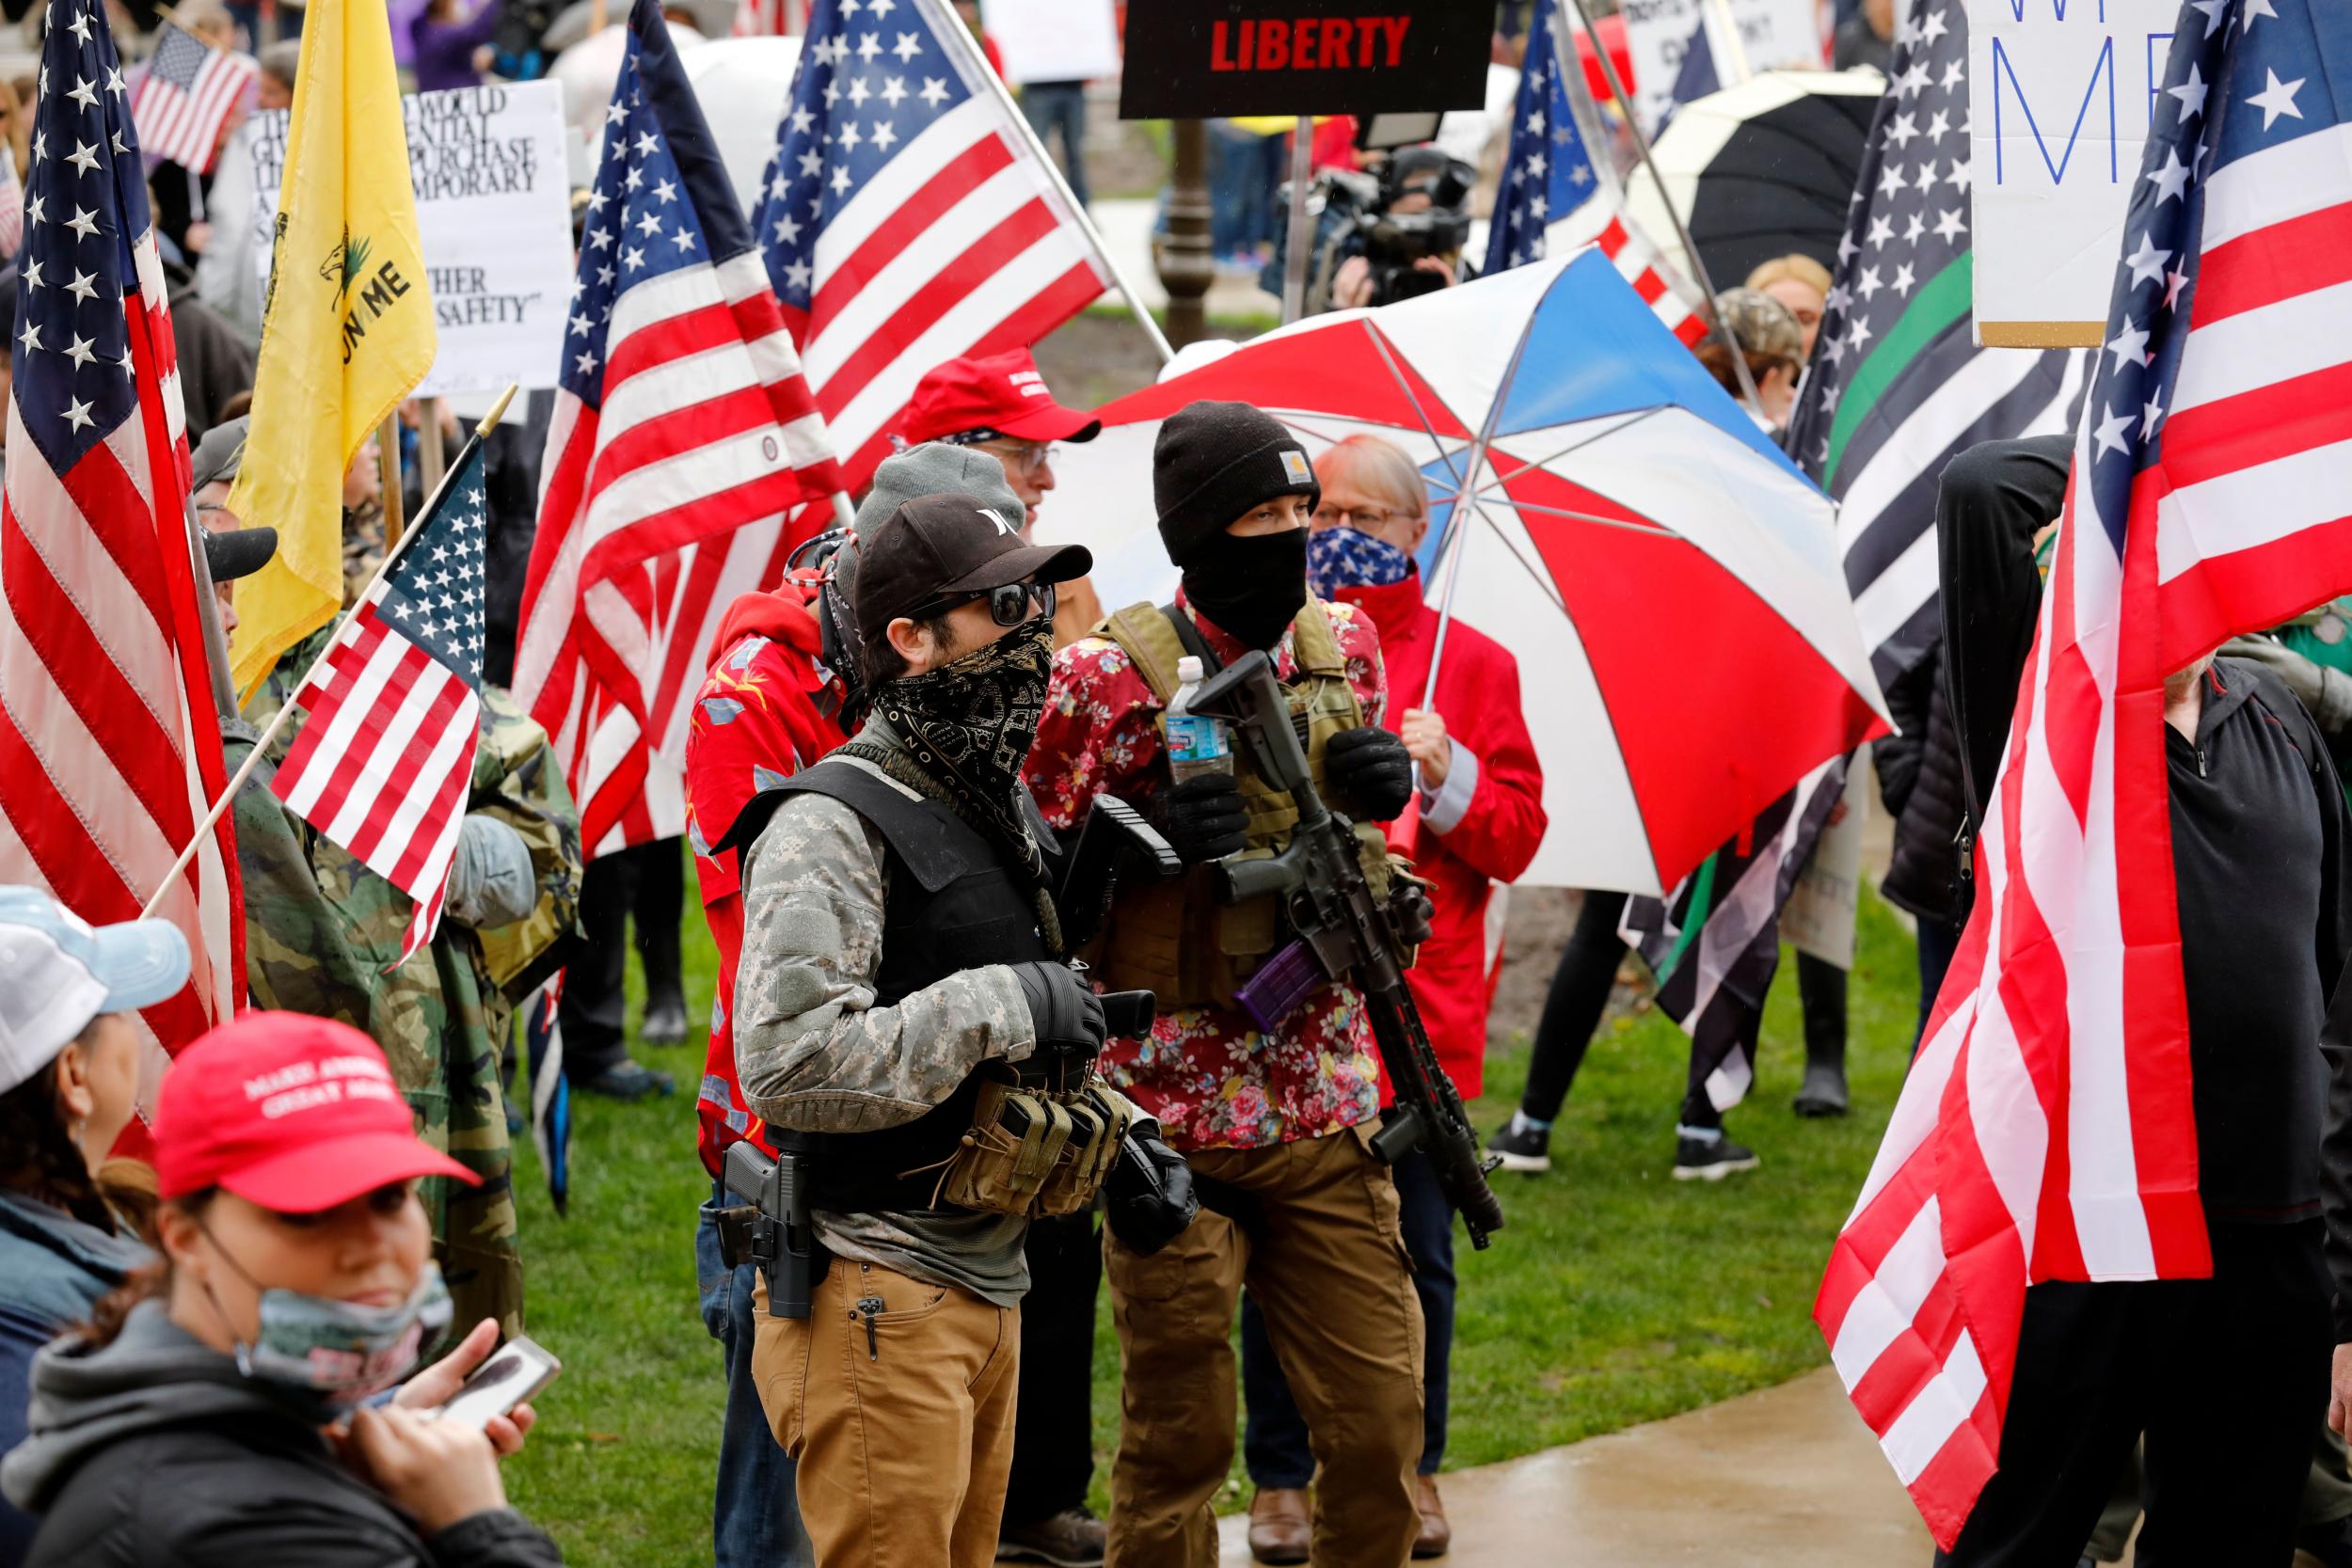 Armed protesters in Lansing, Michigan, provide security as demonstrators take part in an ‘American Patriot Rally’